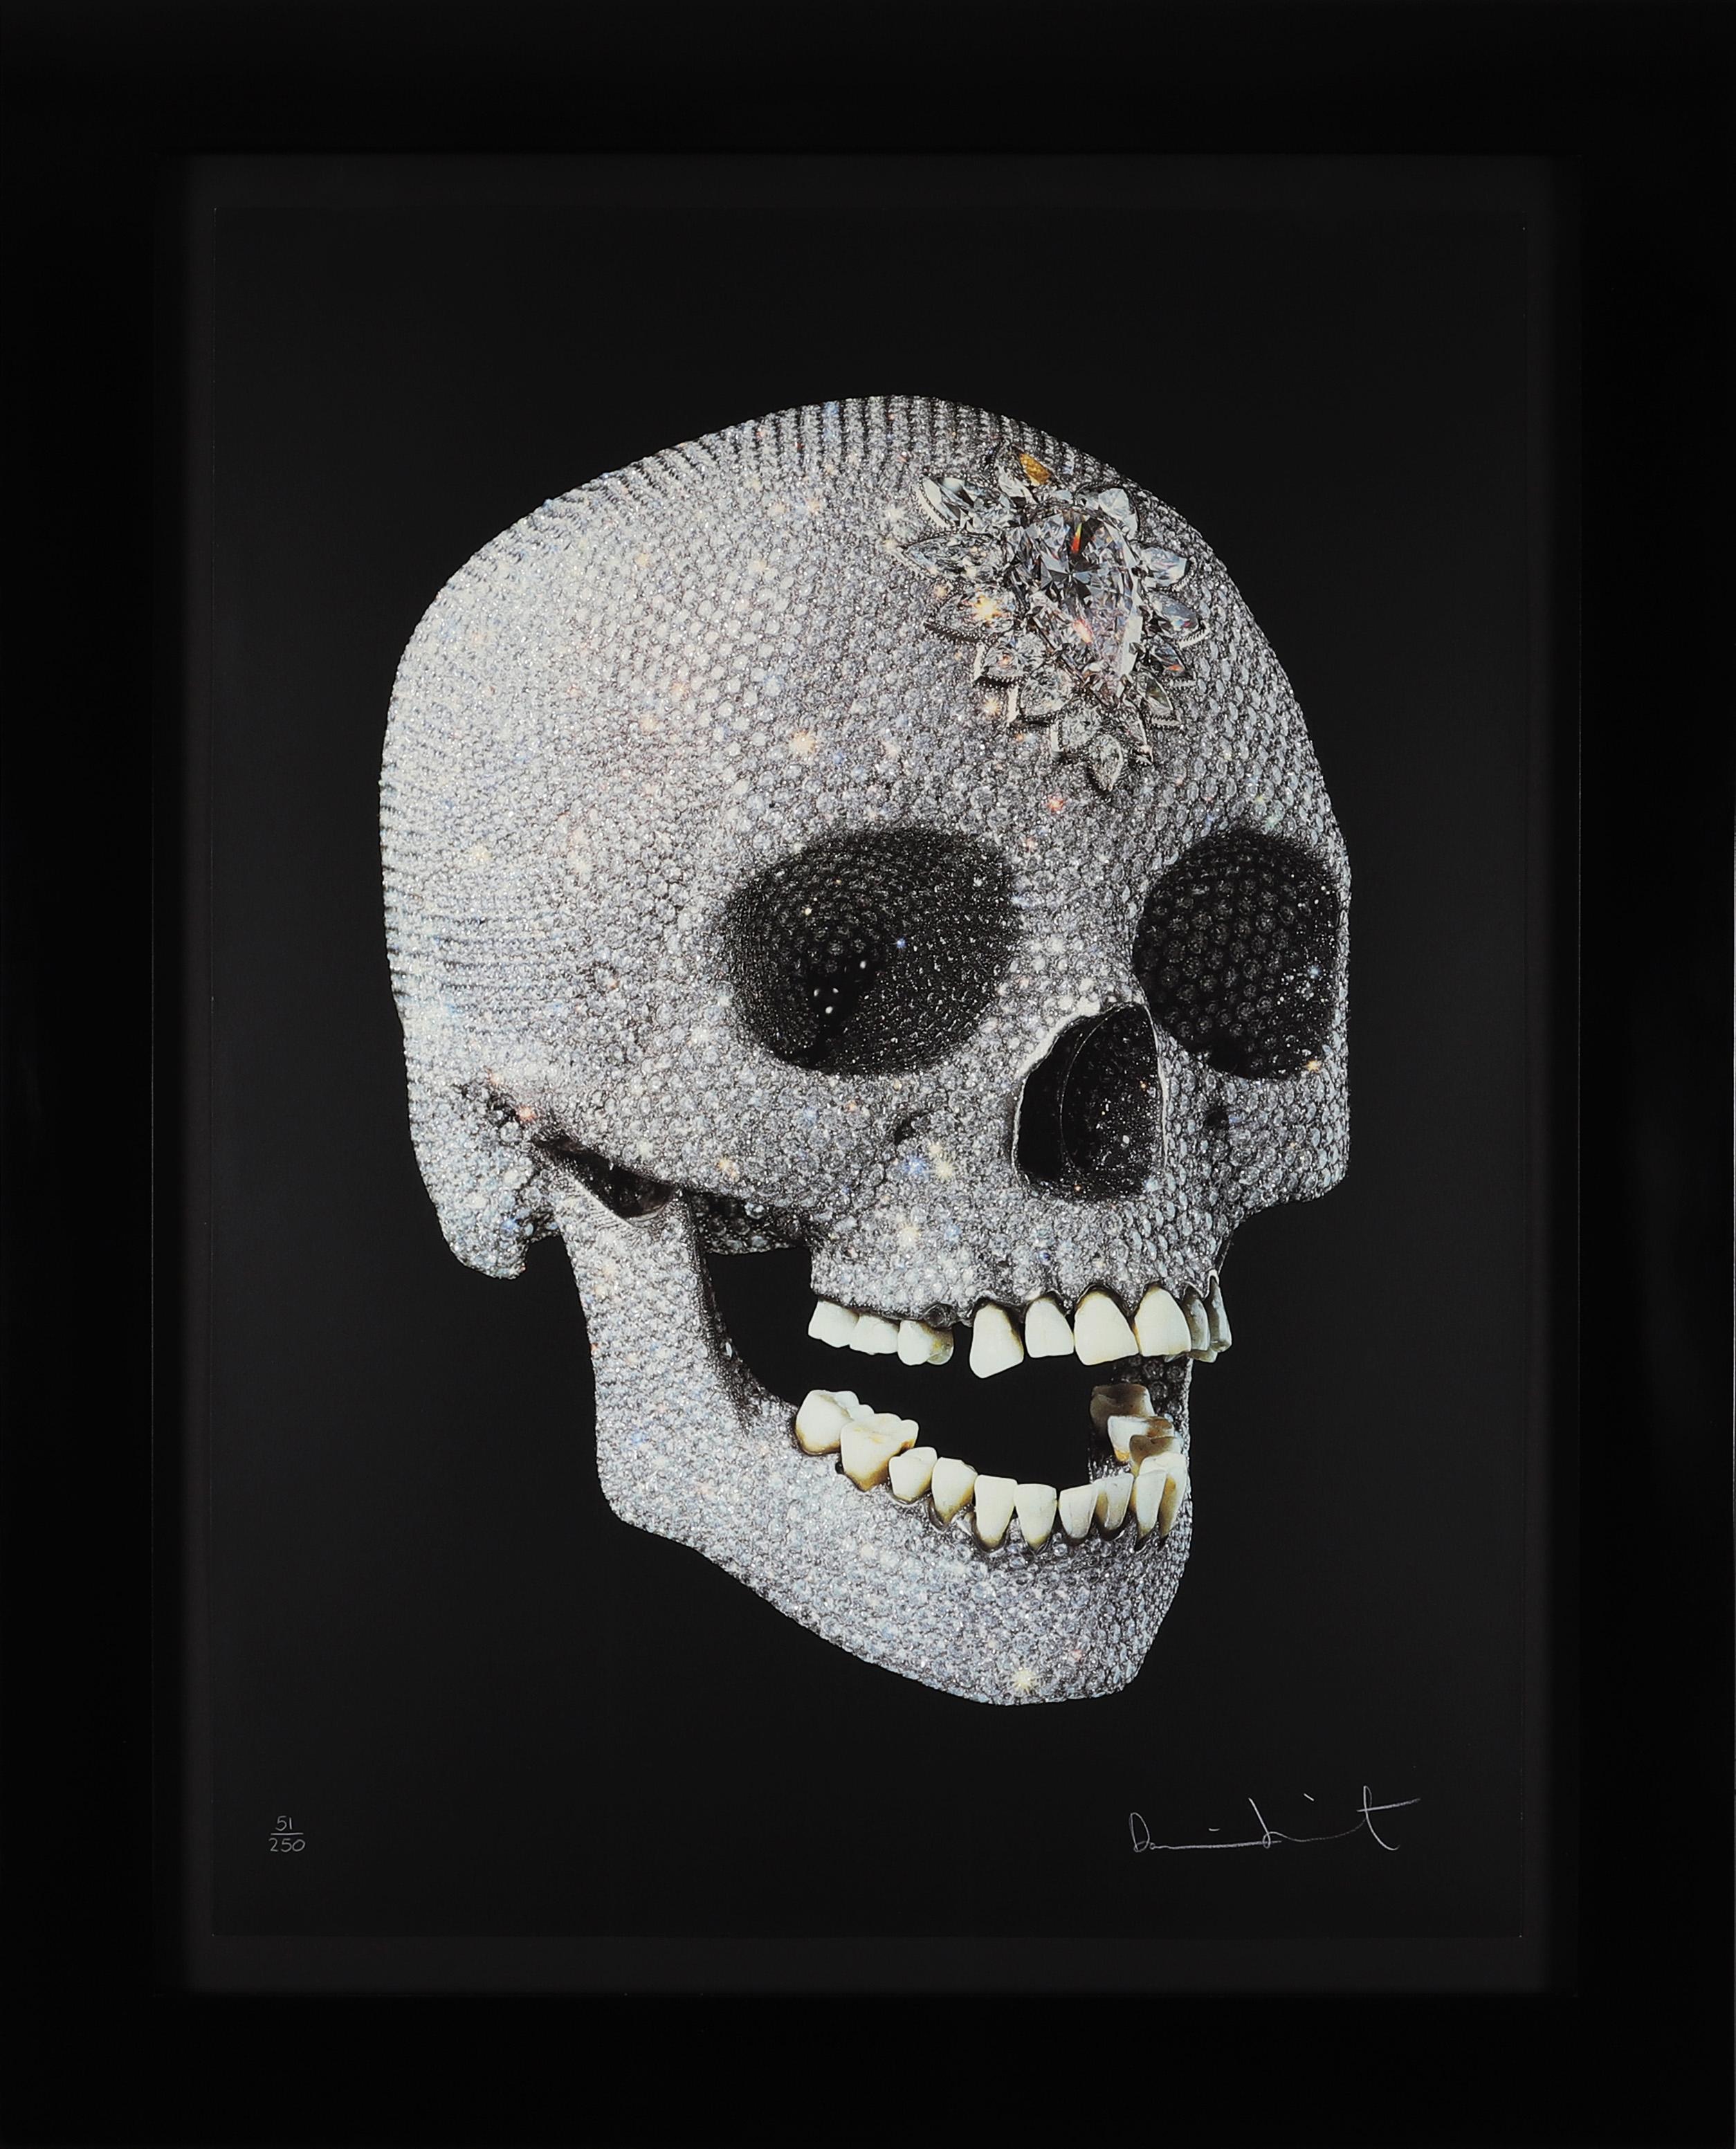 Damien Hirst Landscape Print - 'For the Love of God' Skull with Diamond Dust